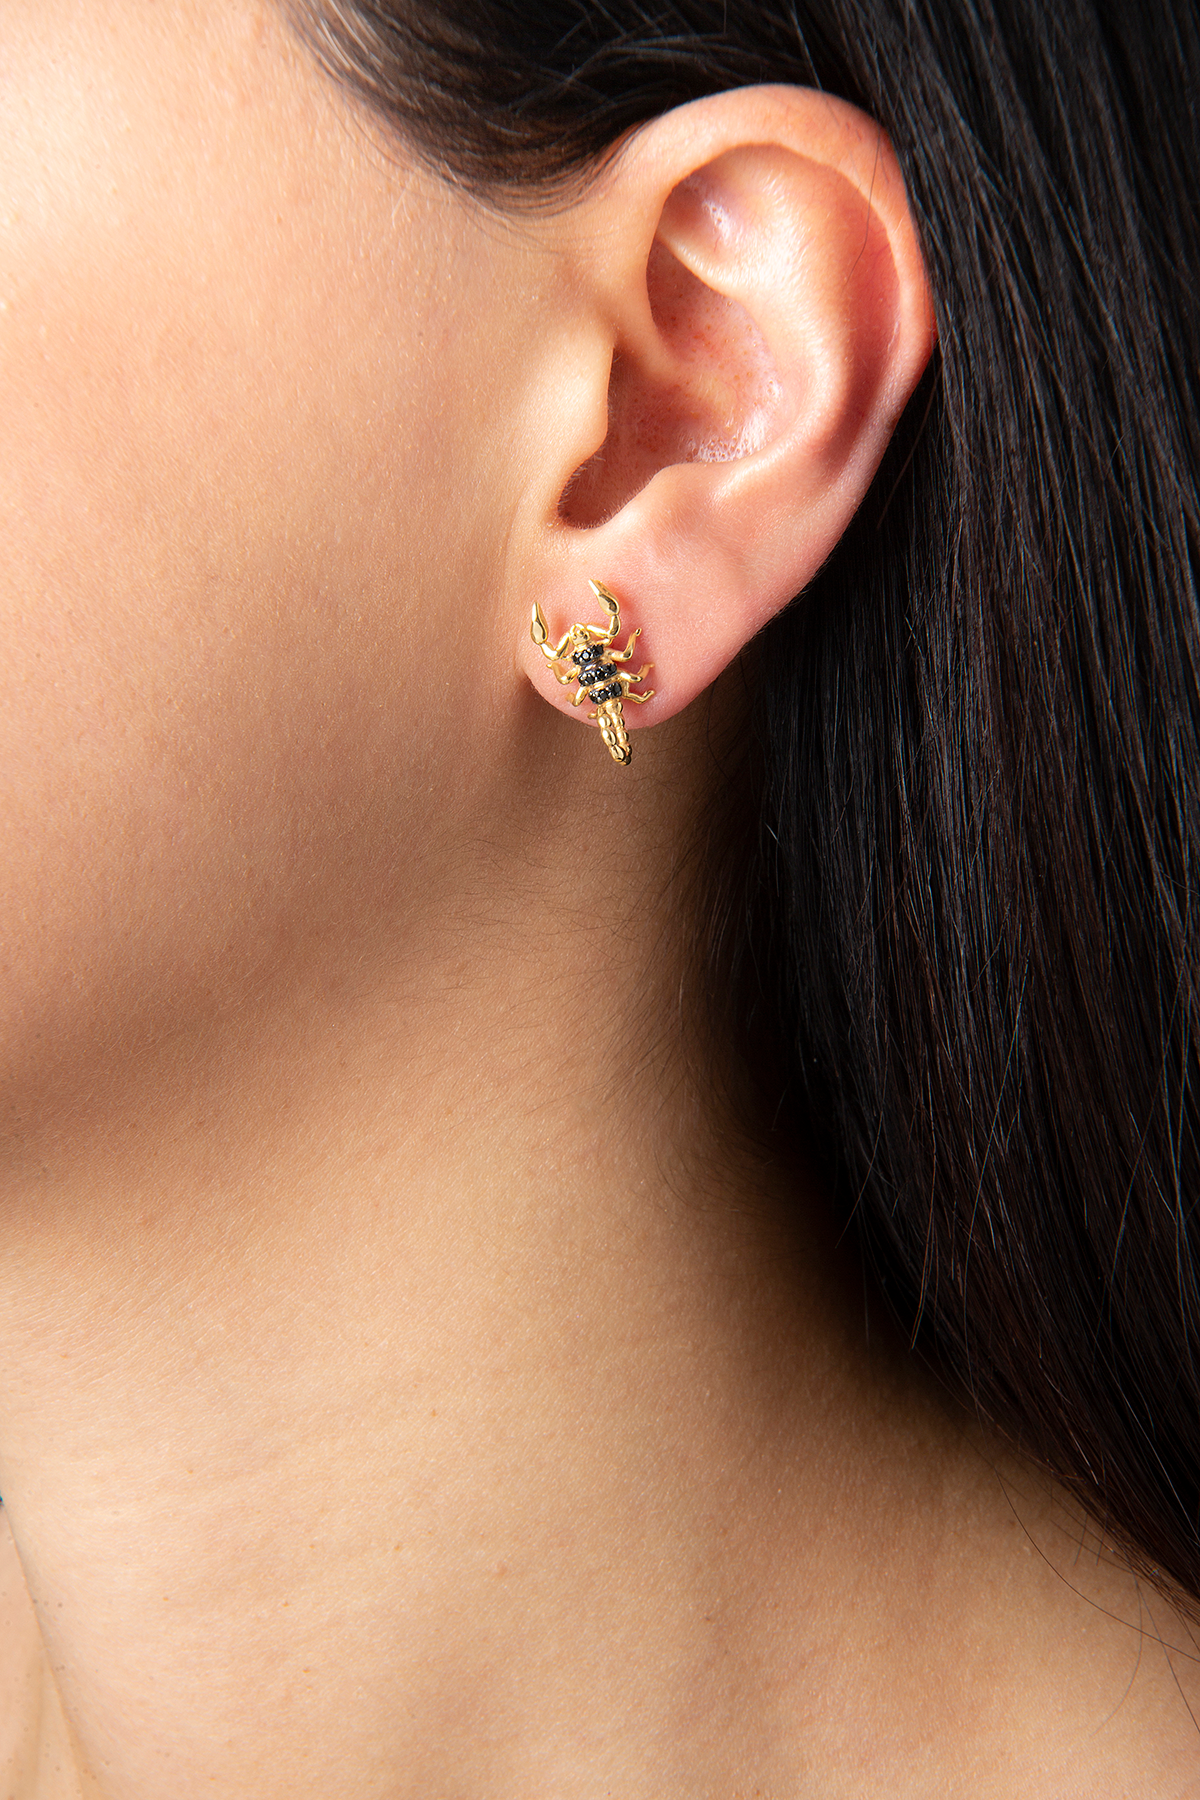 Scorpion Earring in Yellow Gold - Her Story Shop